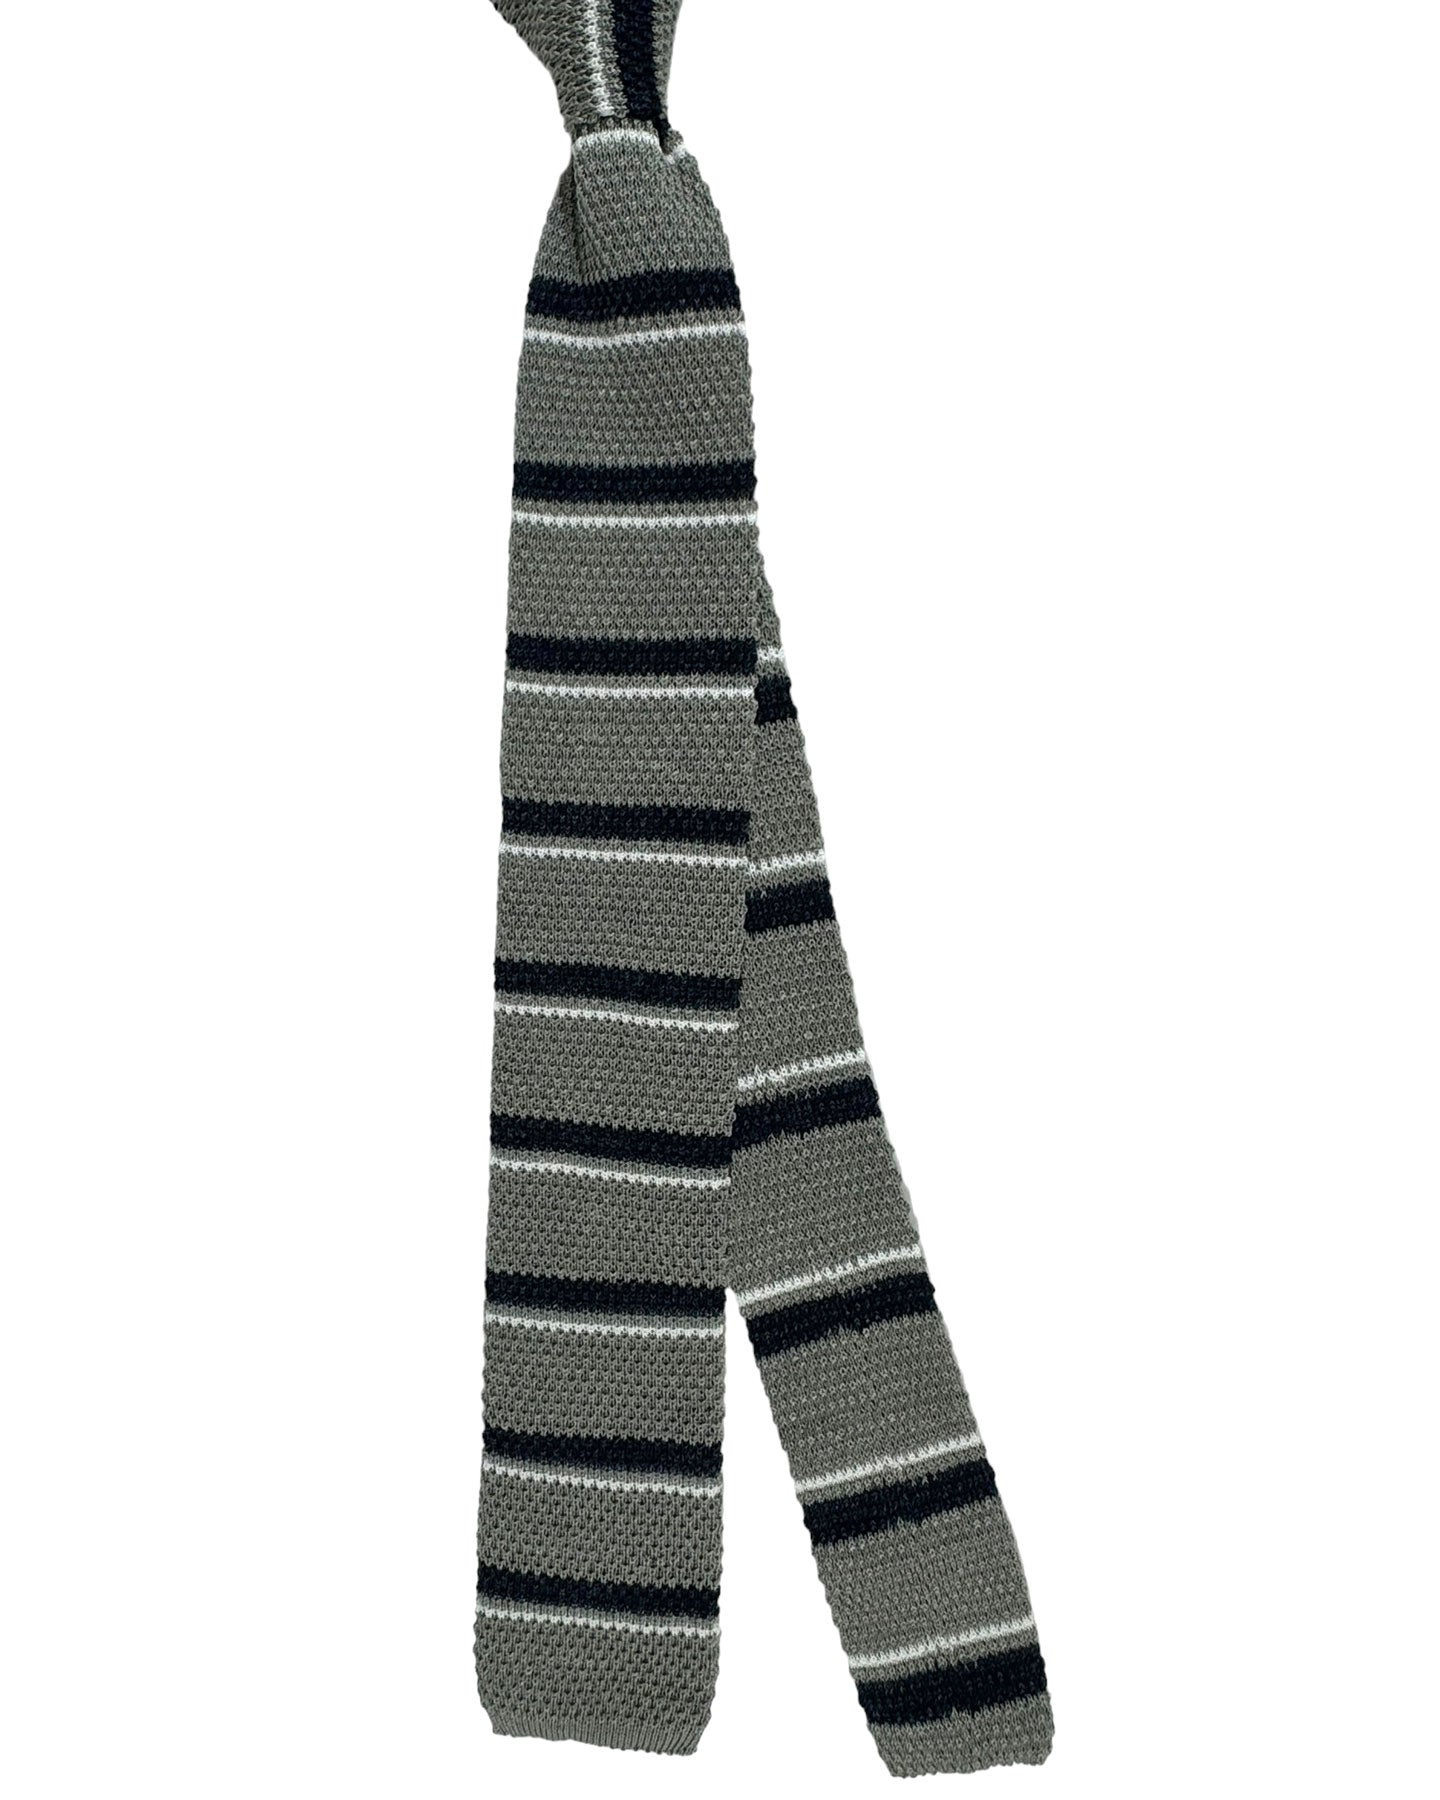 Brunello Cucinelli Square End Knitted Tie Gray Black Horizontal Stripes